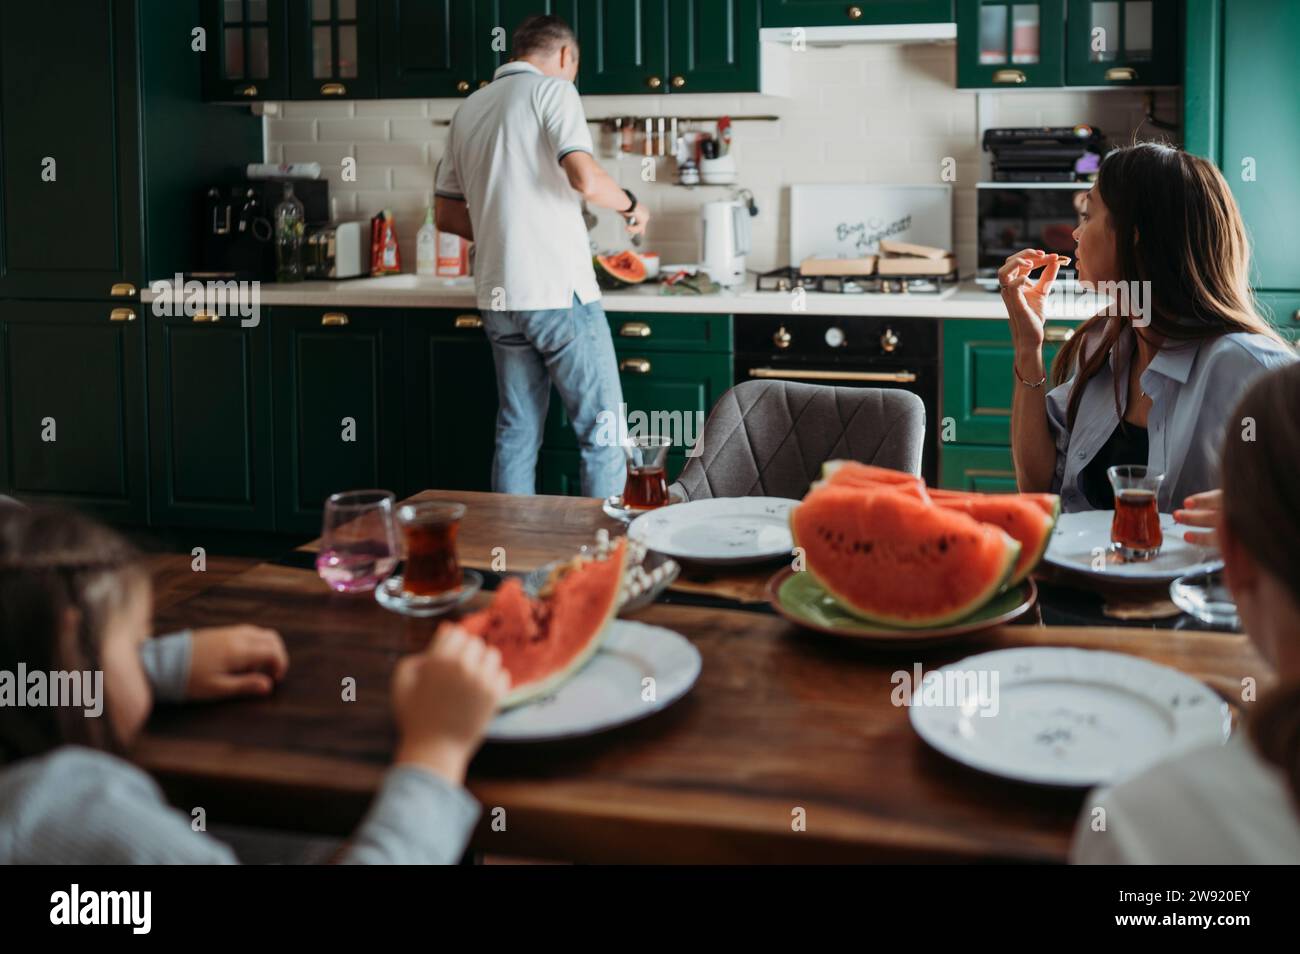 Mother and daughters having lunch at table with man cutting watermelon in kitchen Stock Photo